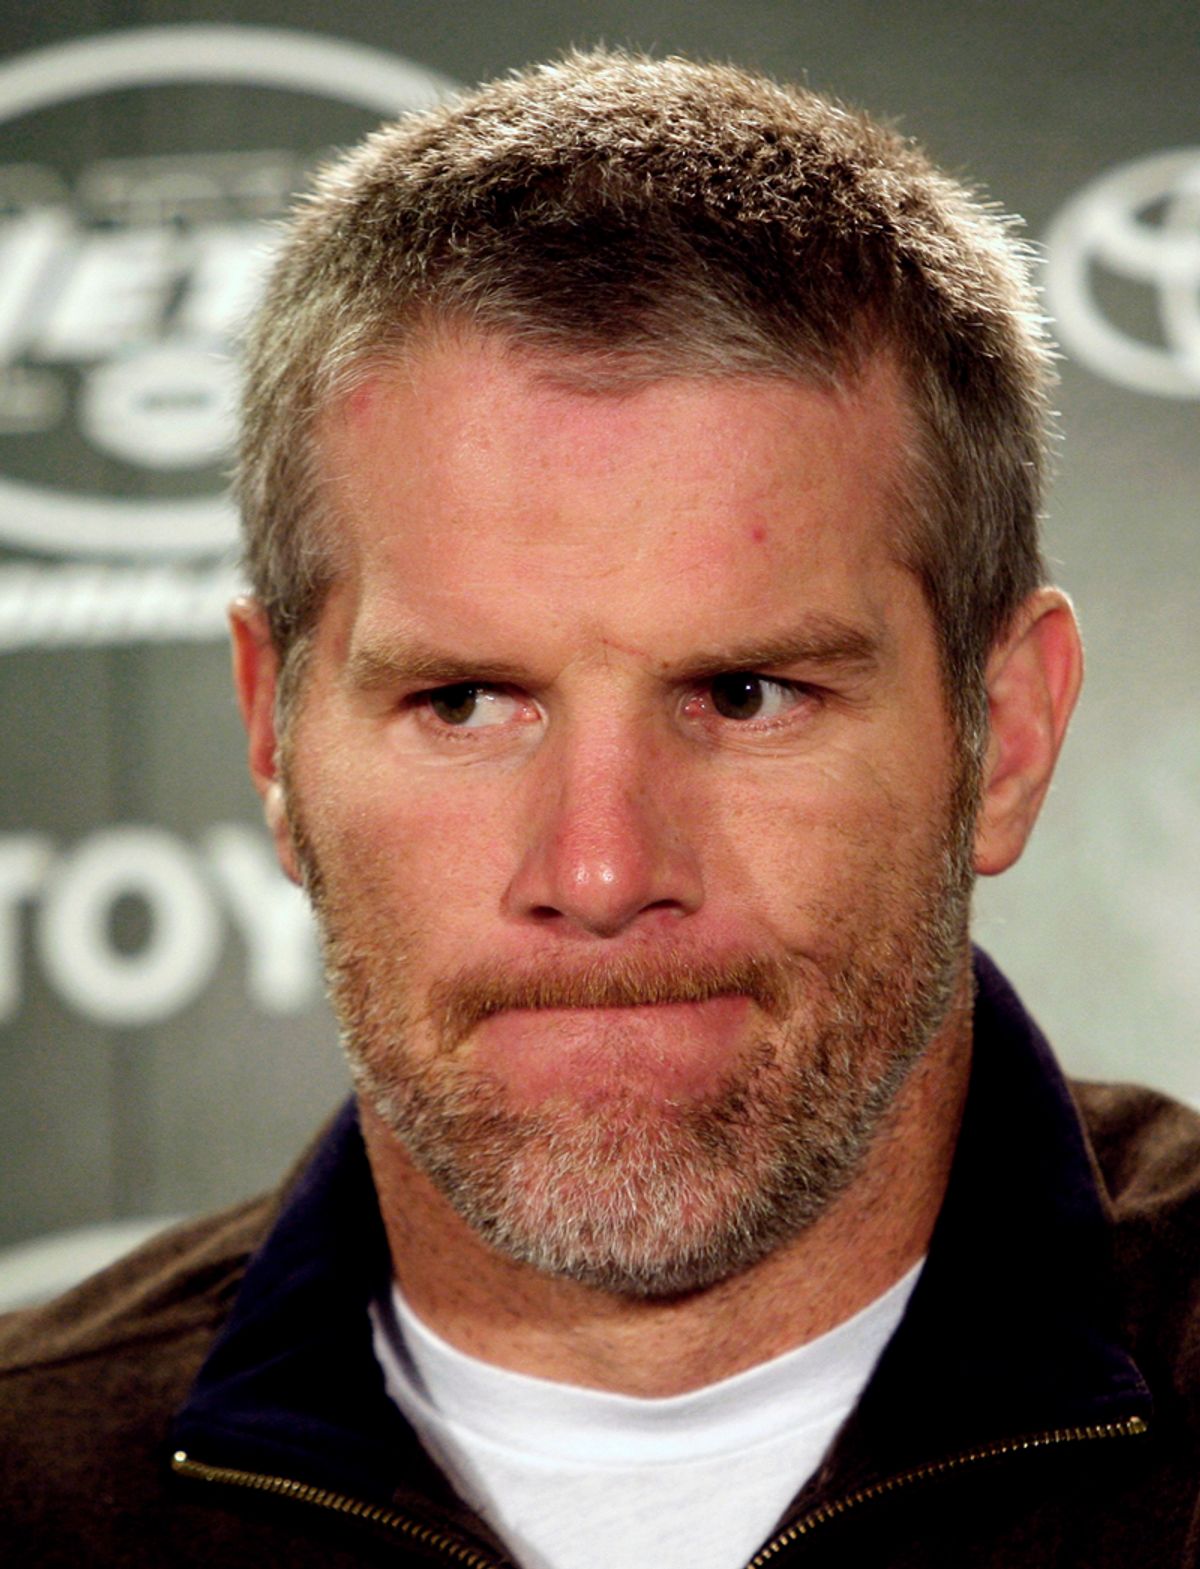 New York Jets quarterback Brett Favre reacts during a news conference after their loss to the Miami Dolphins in their NFL football game in East Rutherford, New Jersey, December 28, 2008. REUTERS/Mike Segar (UNITED STATES)   (Â© Mike Segar / Reuters)